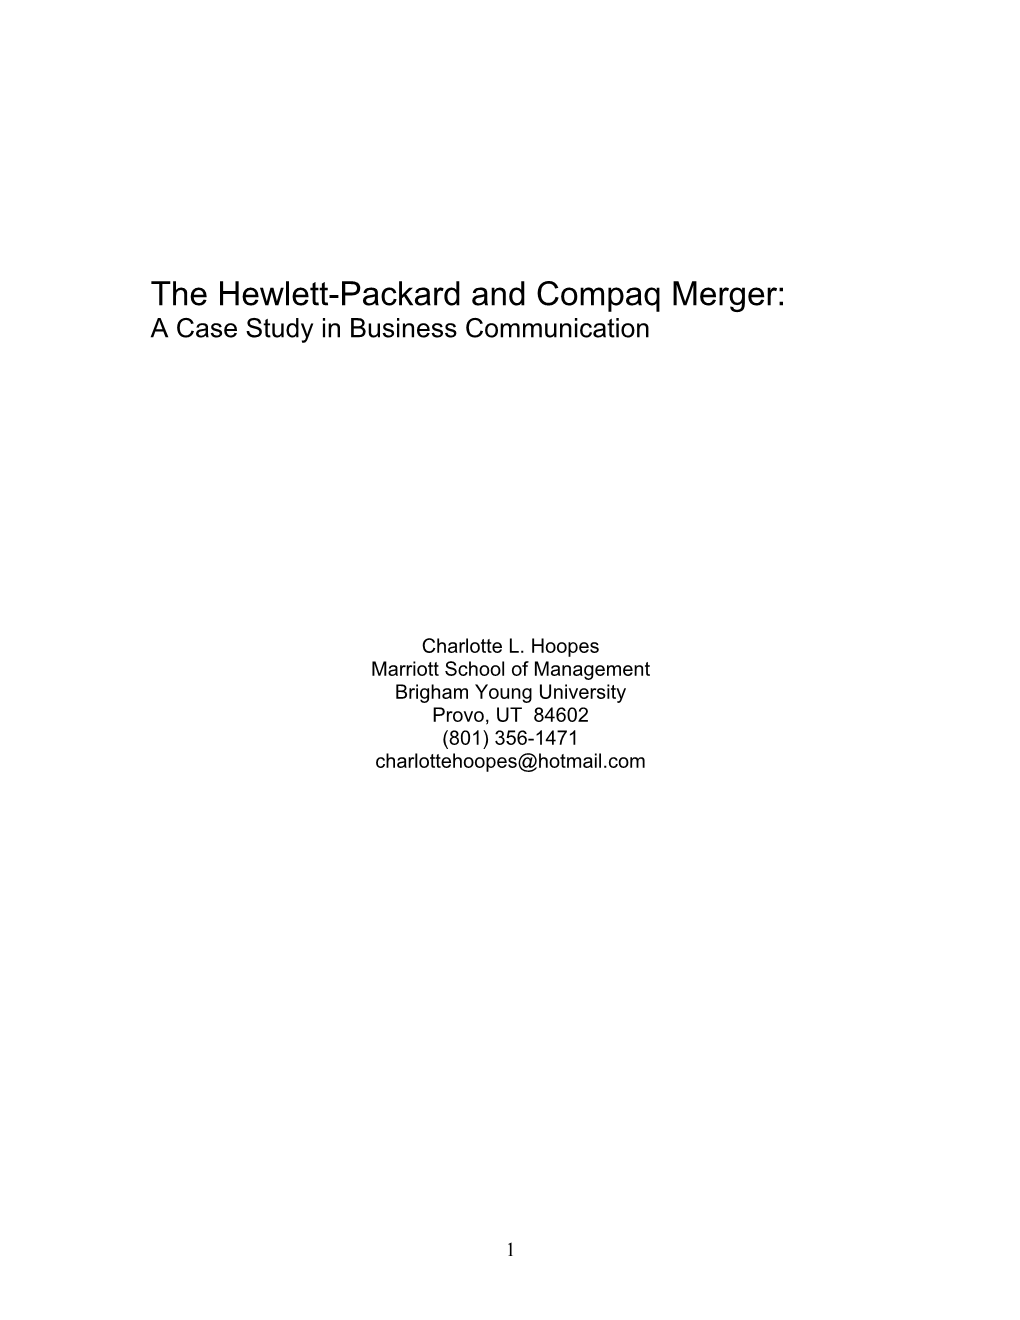 The Hewlett-Packard and Compaq Merger: a Case Study in Business Communication